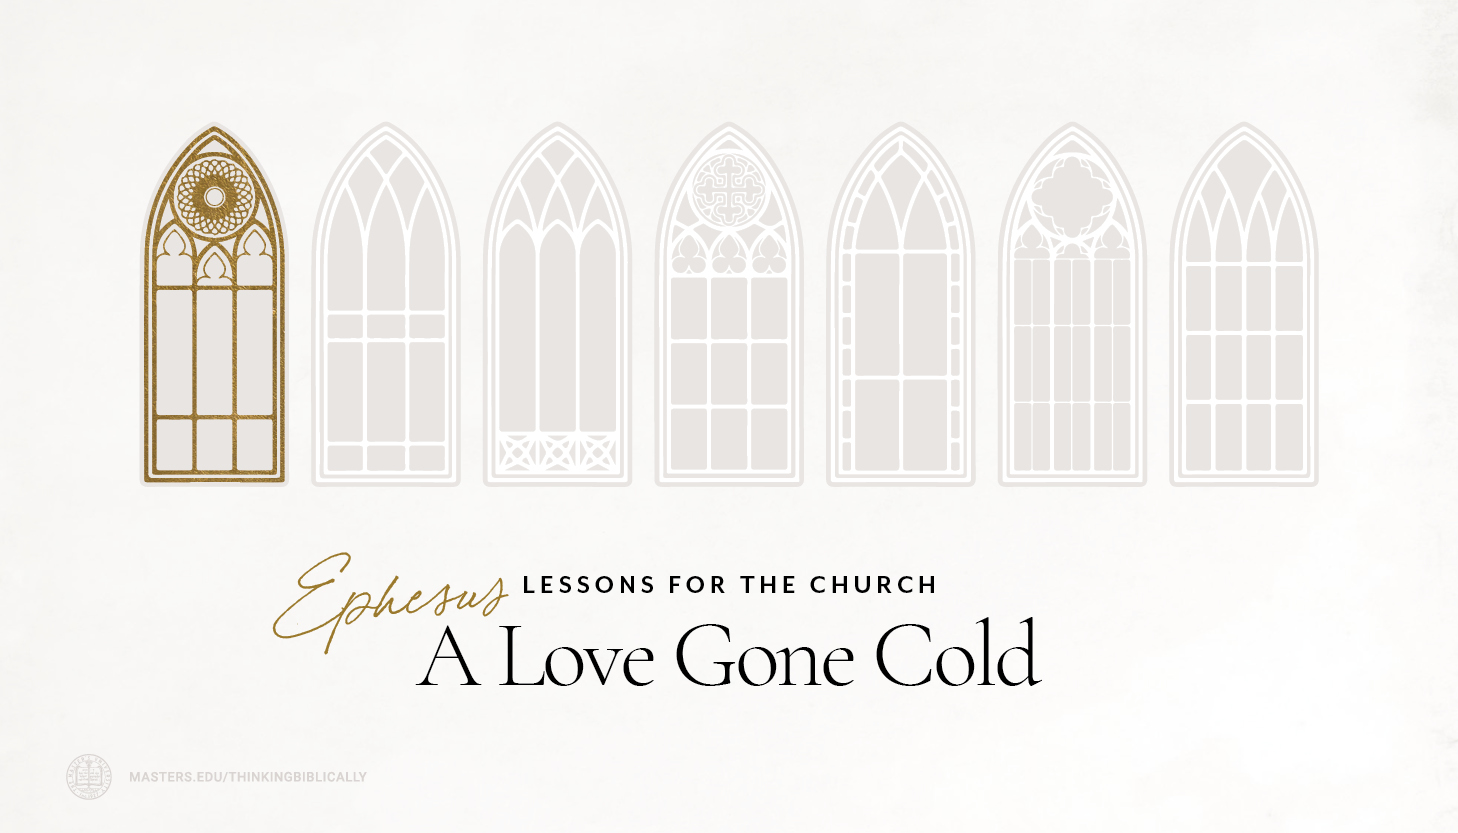 Ephesus: A Love Gone Cold Featured Image